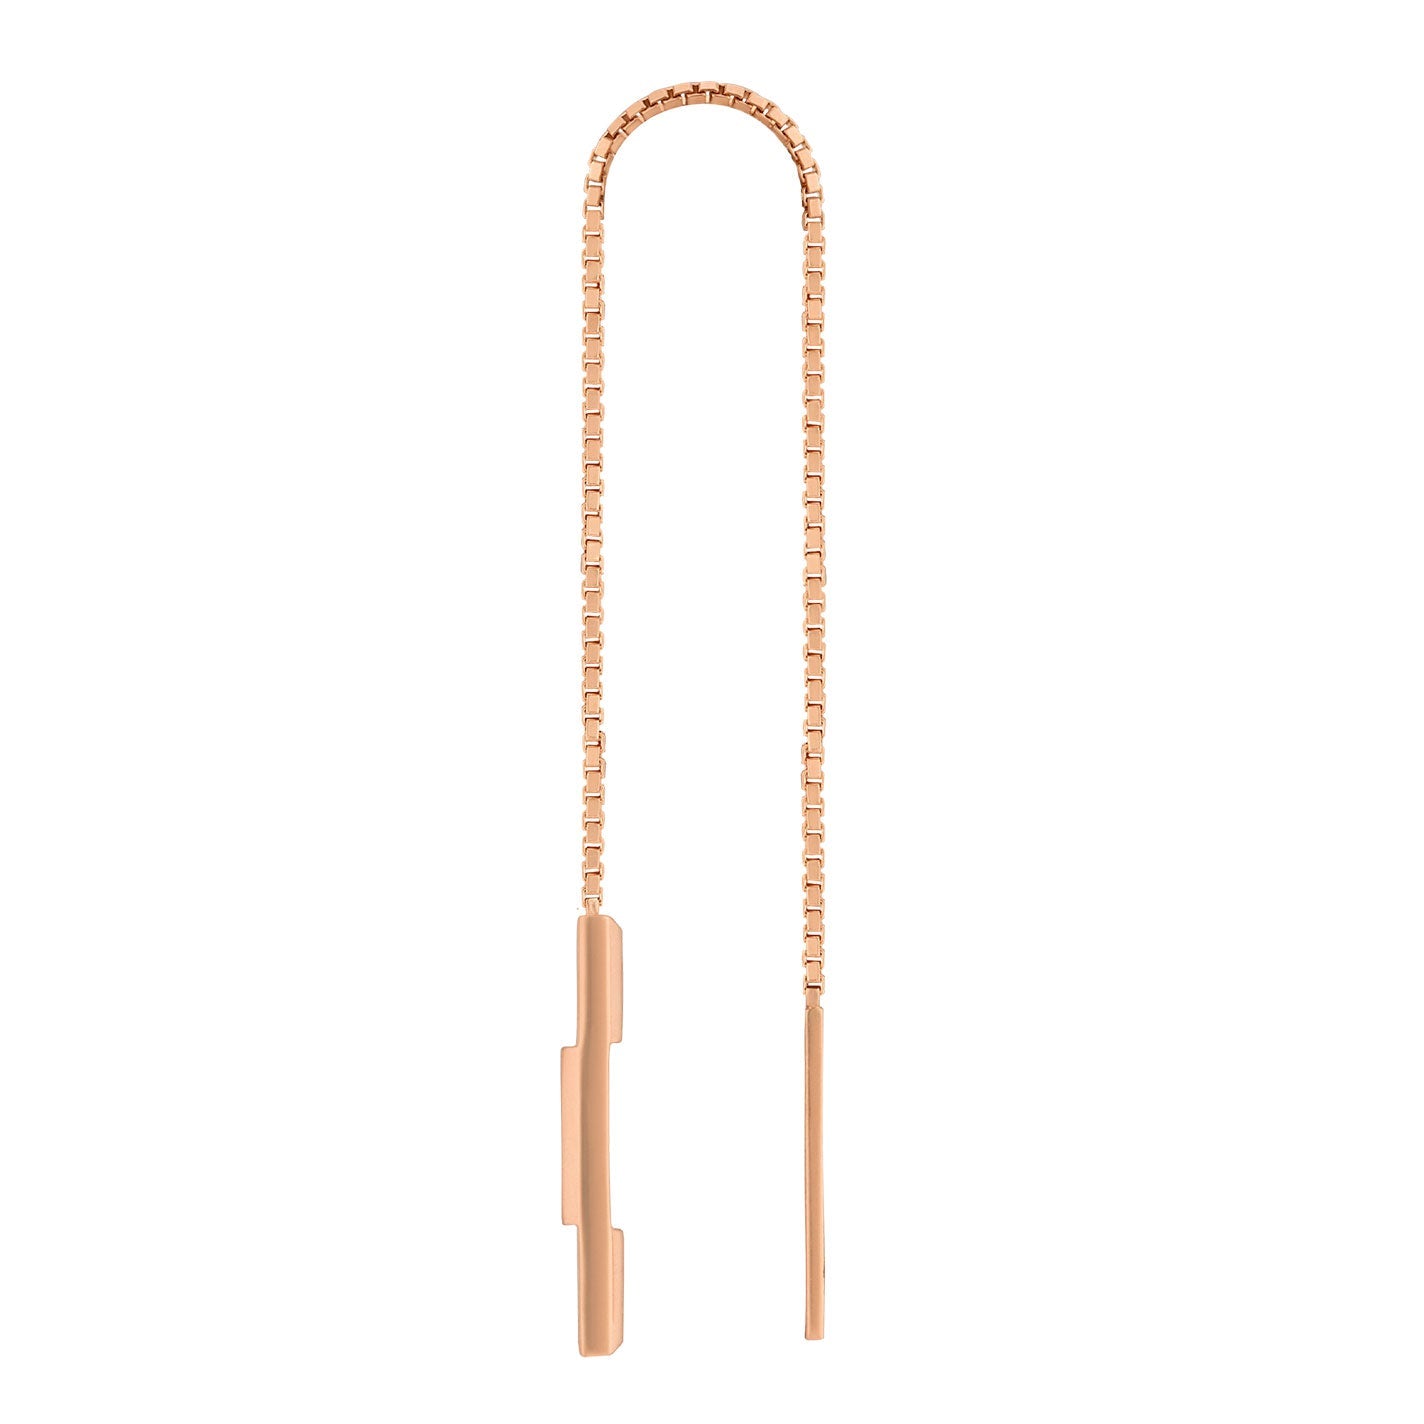 Gucci Link To Love 18K Rose Gold Chain Drop Earrings With "Gucci" Bar